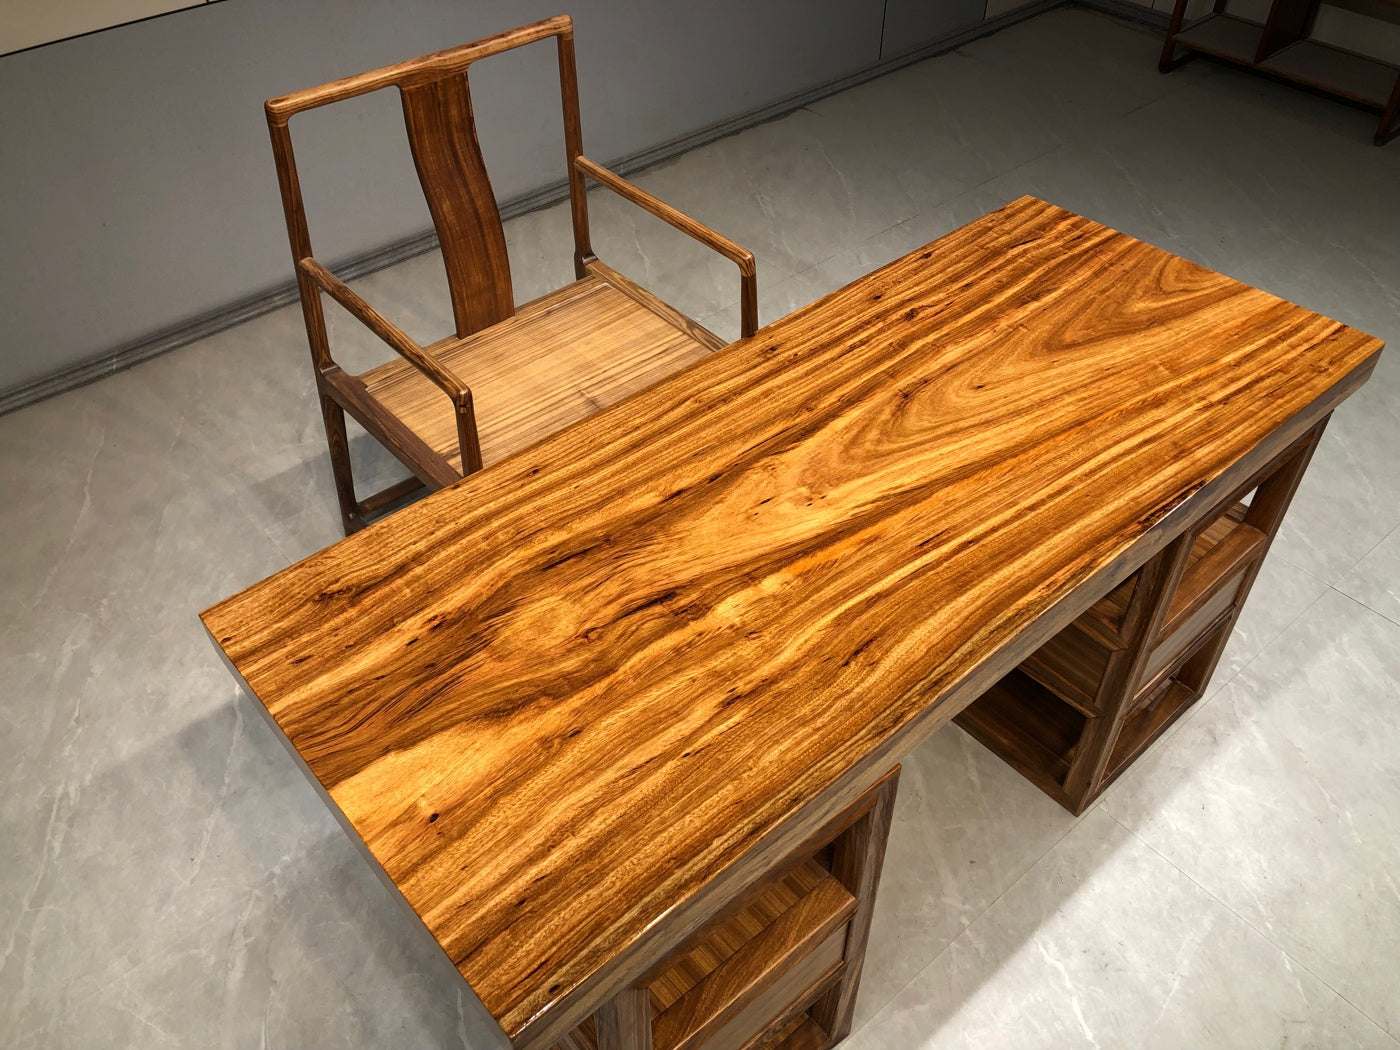 Flat slab, slab table top, dining table, Western Africa wood table